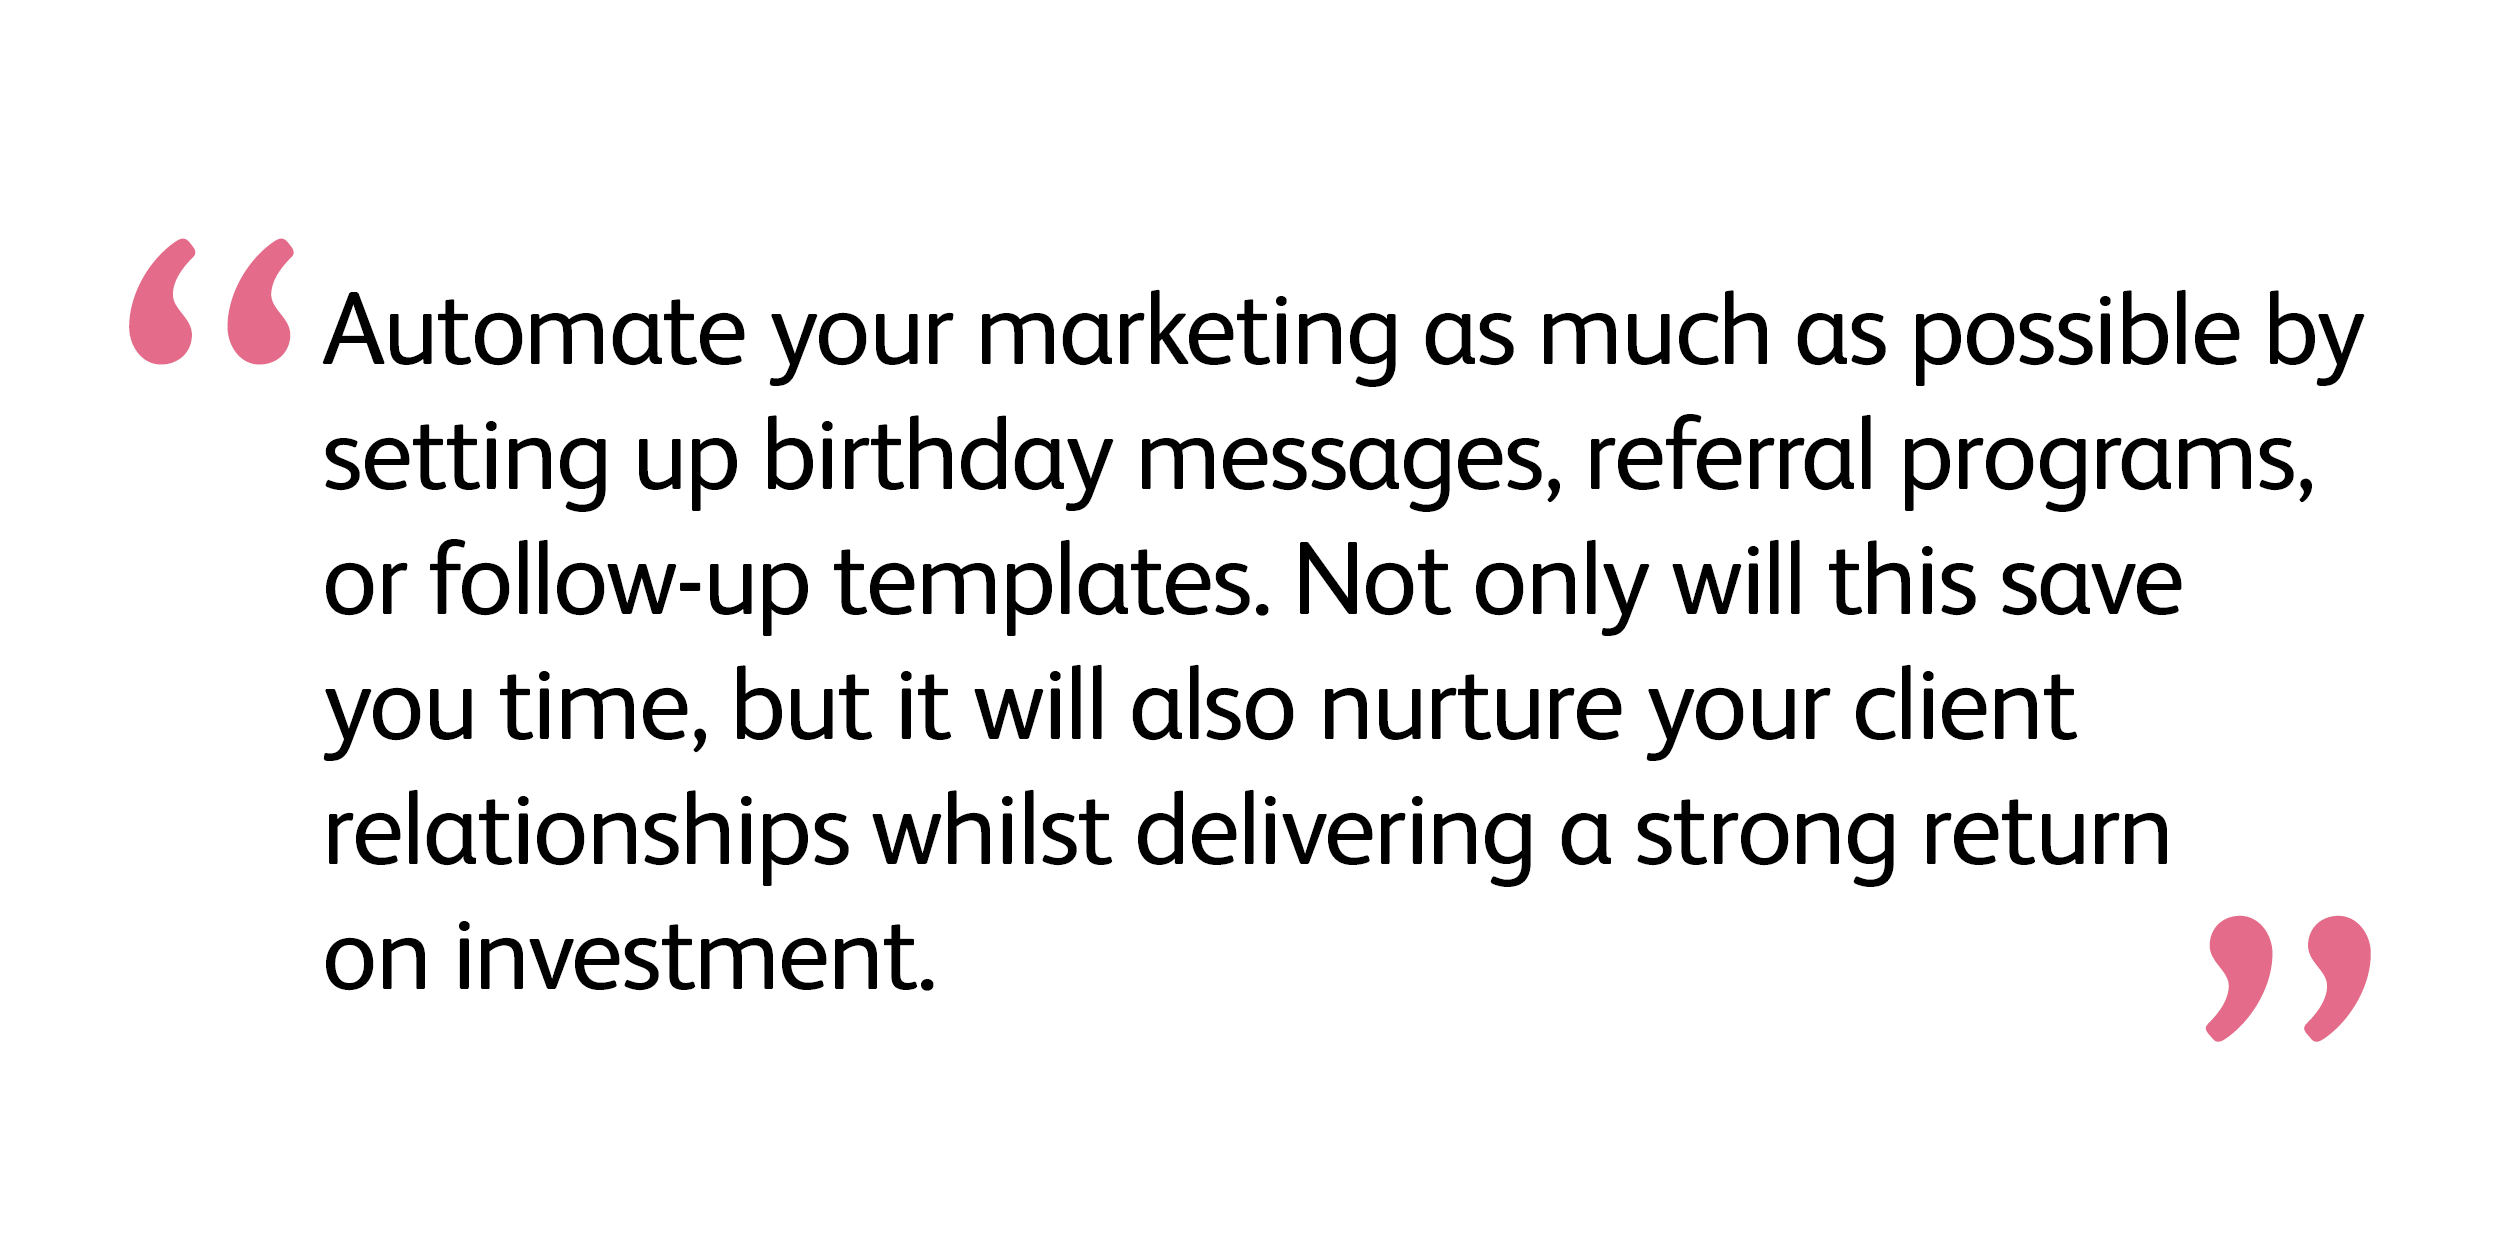 Automate your marketing as much as possible by setting up birthday messages, referral programs, or follow-up templates. Not only will this save you time, but it will also nurture your client relationships whilst delivering a strong return on investment.  Laura Smyth, Salon Coach, Kitomba Trainer and Director of Lush Skin & Body